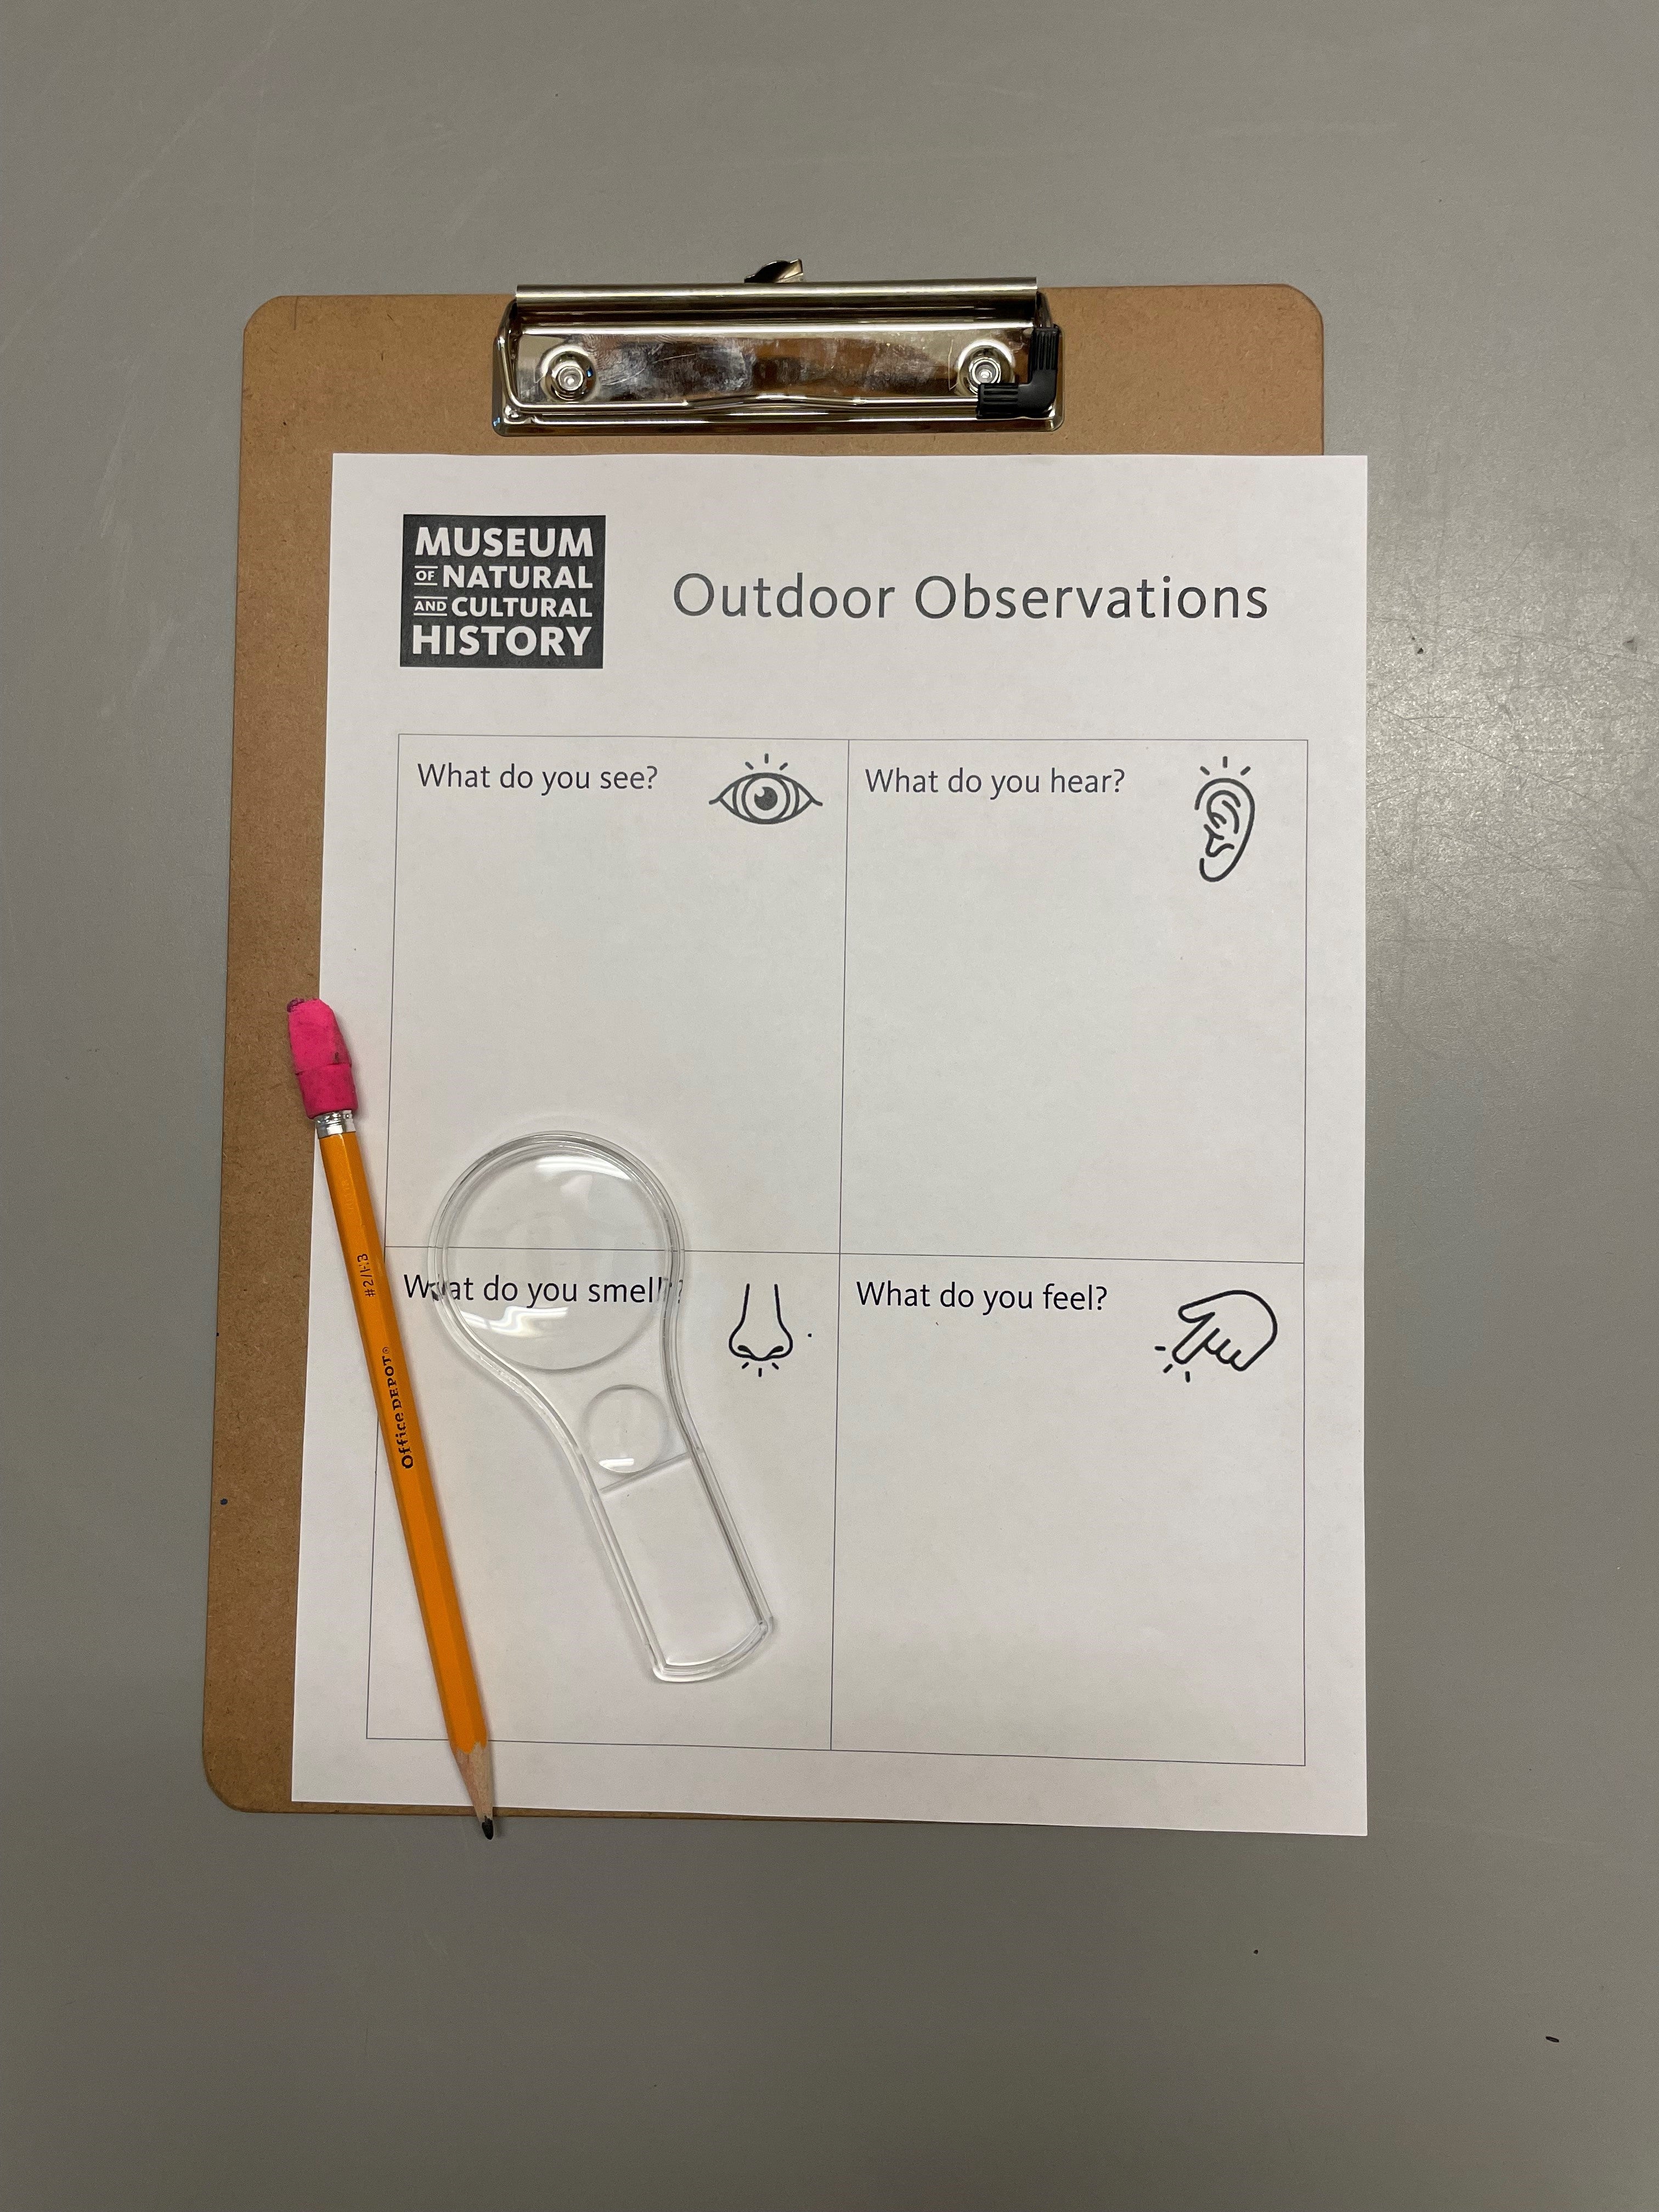 The outdoor observations sheet